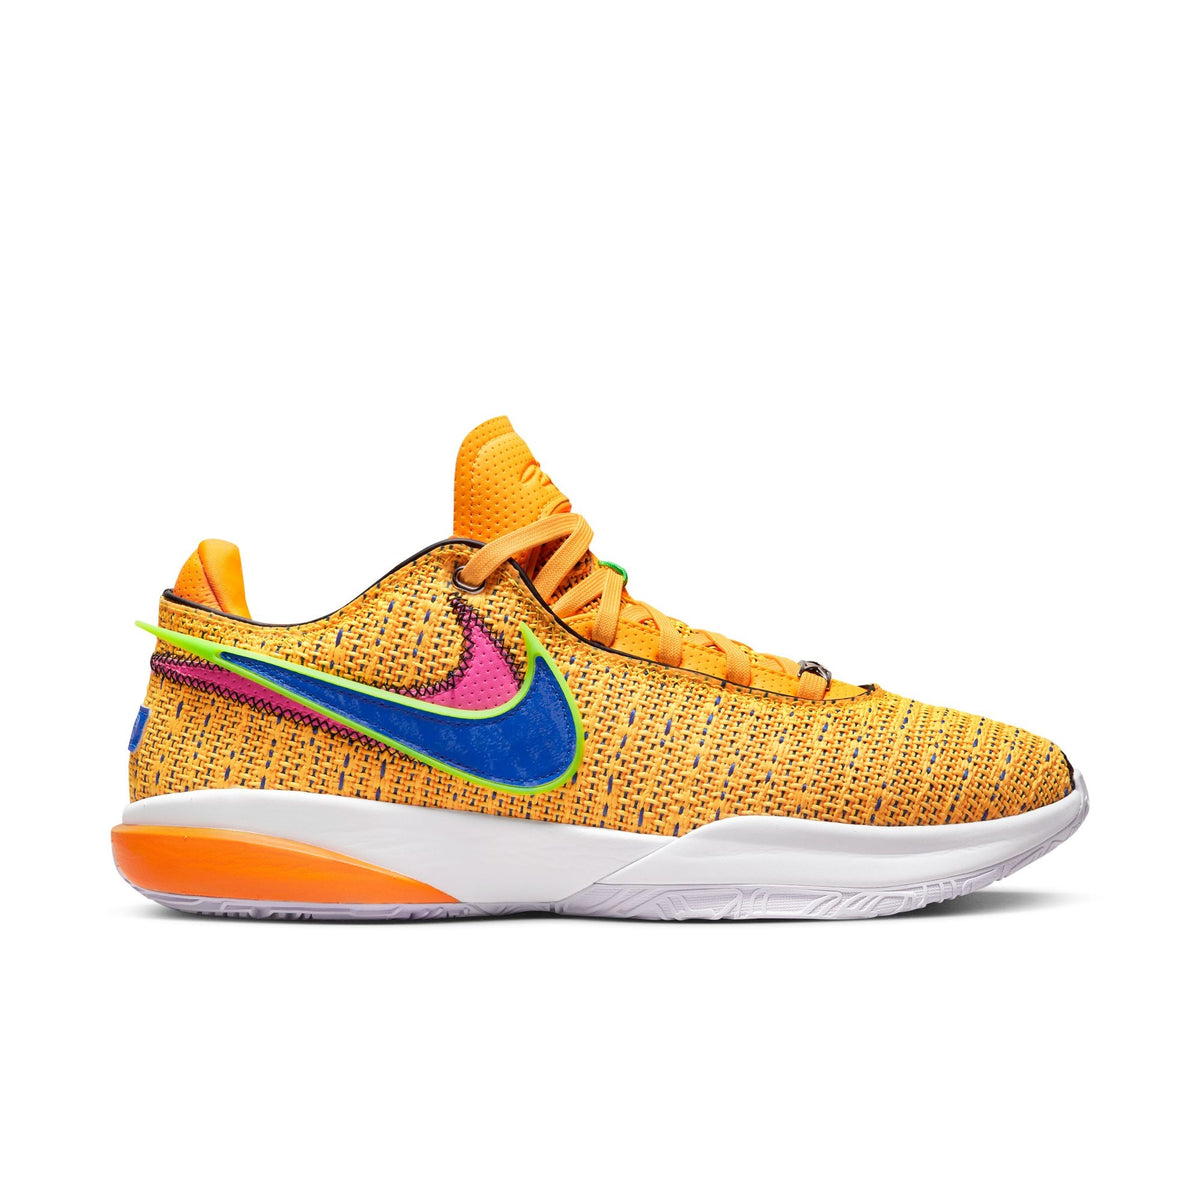 2023 Kobes 6 Basketball Shoes LeBrons 20 XX Mens Trainers The